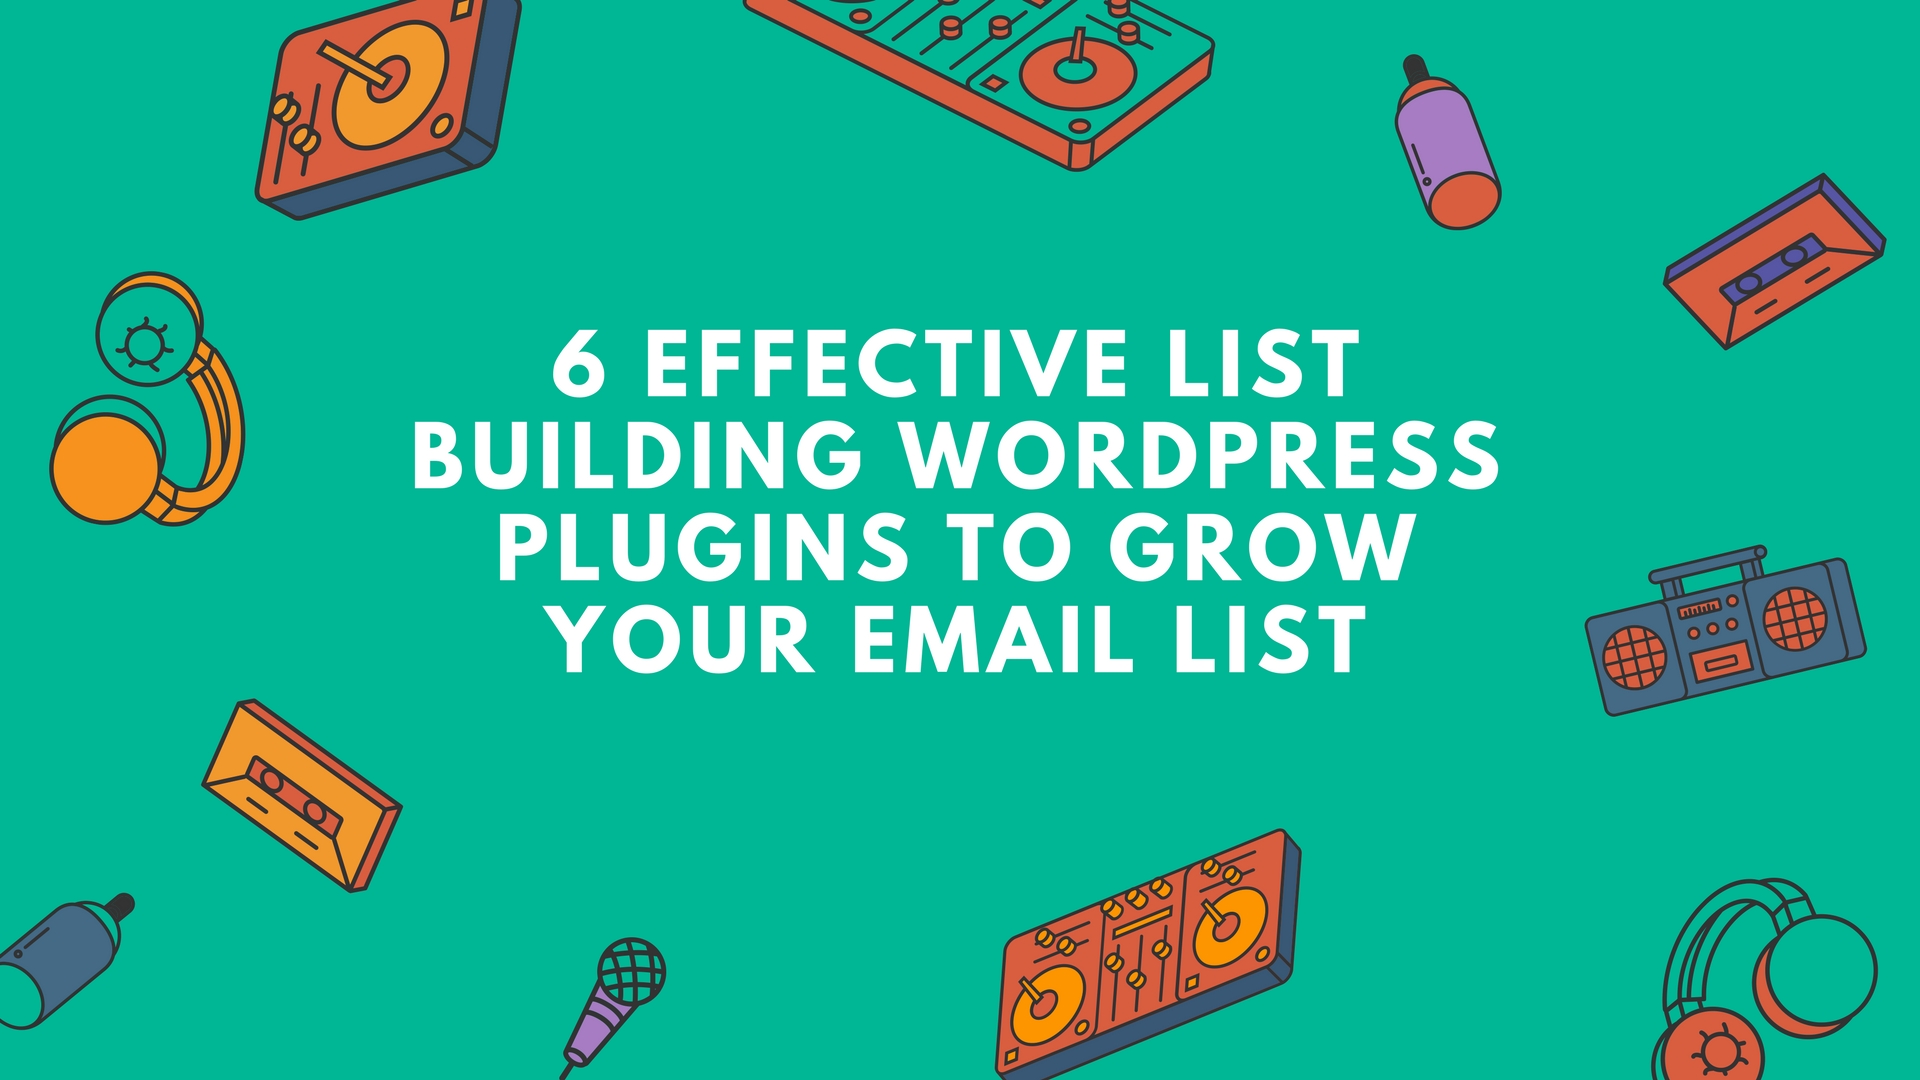 6 Effective List Building WordPress Plugins To Grow Your Email List